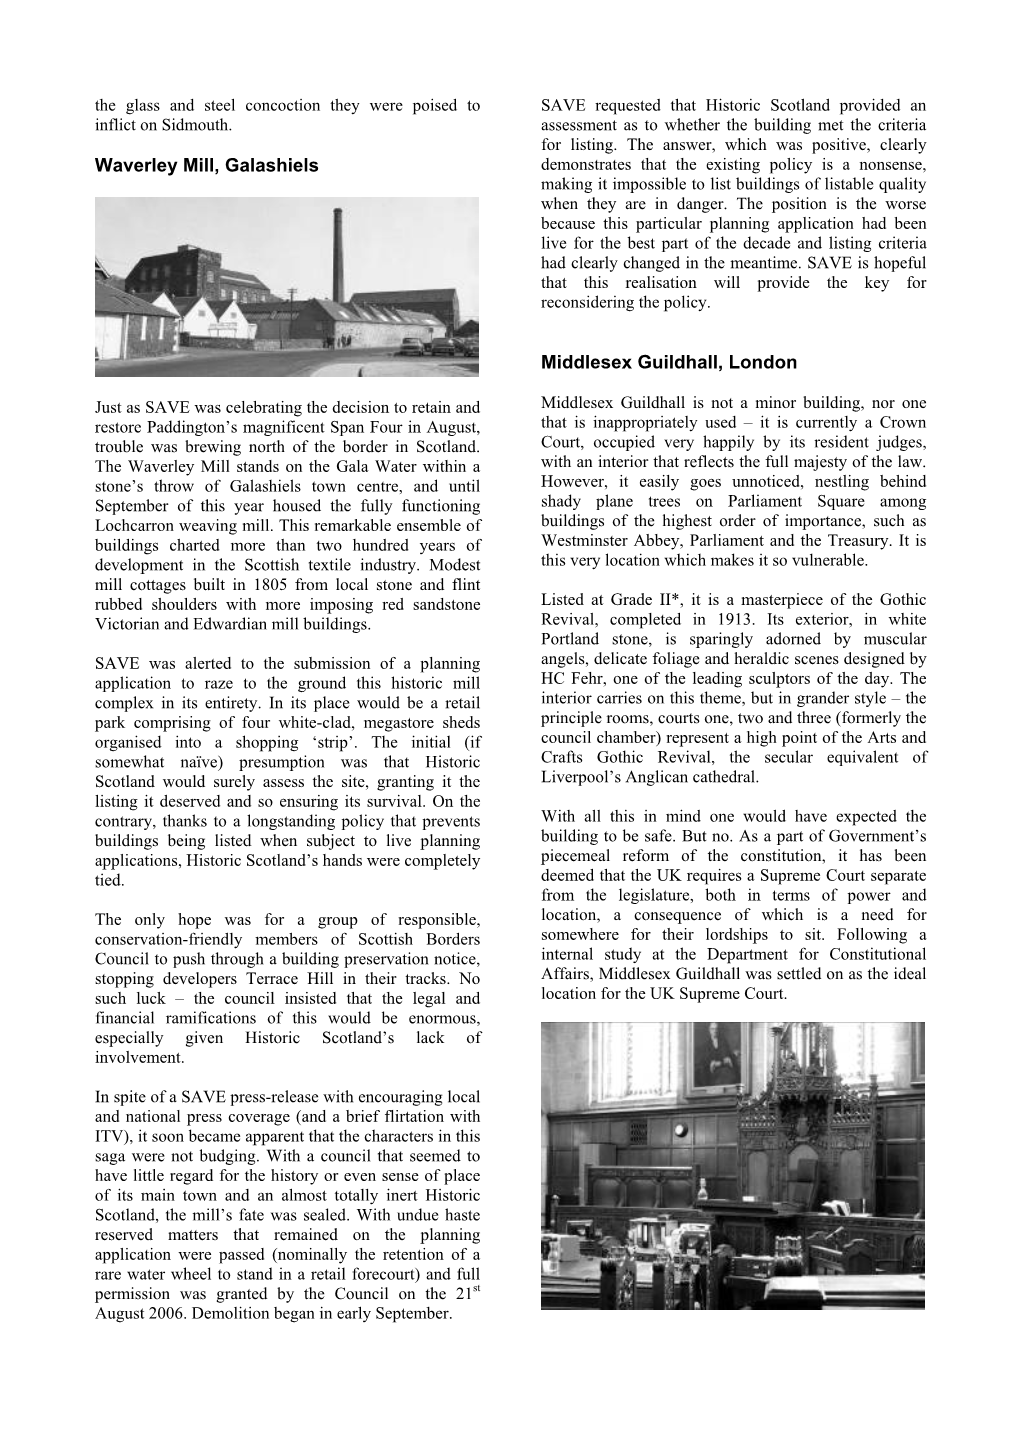 Guildhall Article Featured in SAVE's November